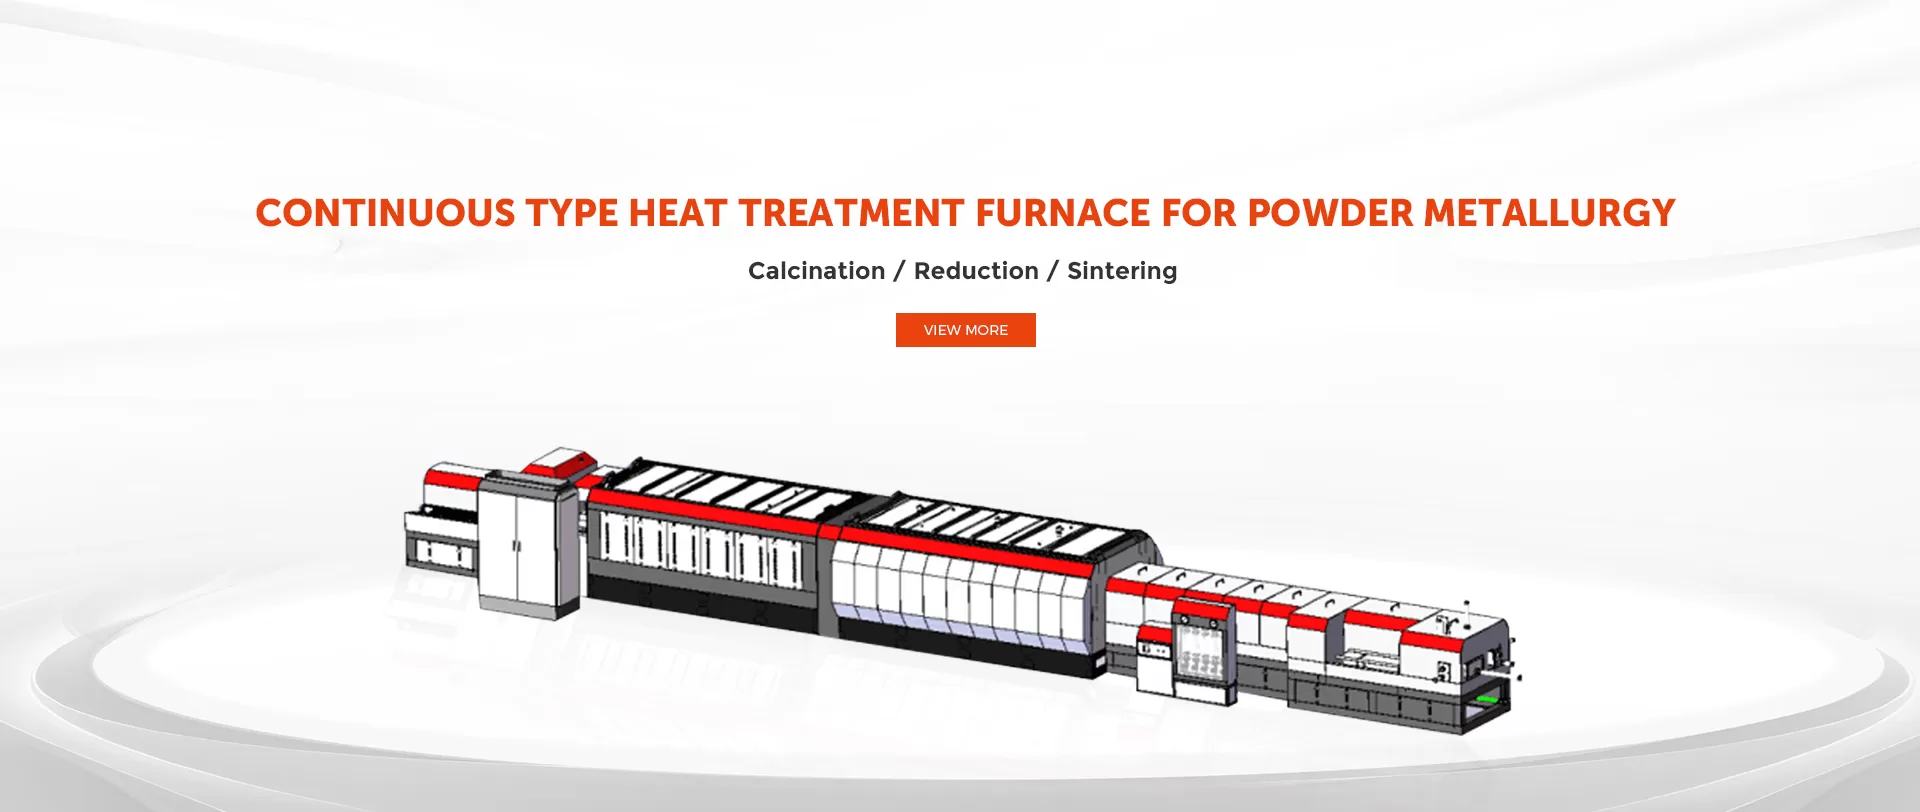 CONTINUOUS TYPE HEAT TREATMENT FURNACE FOR POWDER METALLURGY